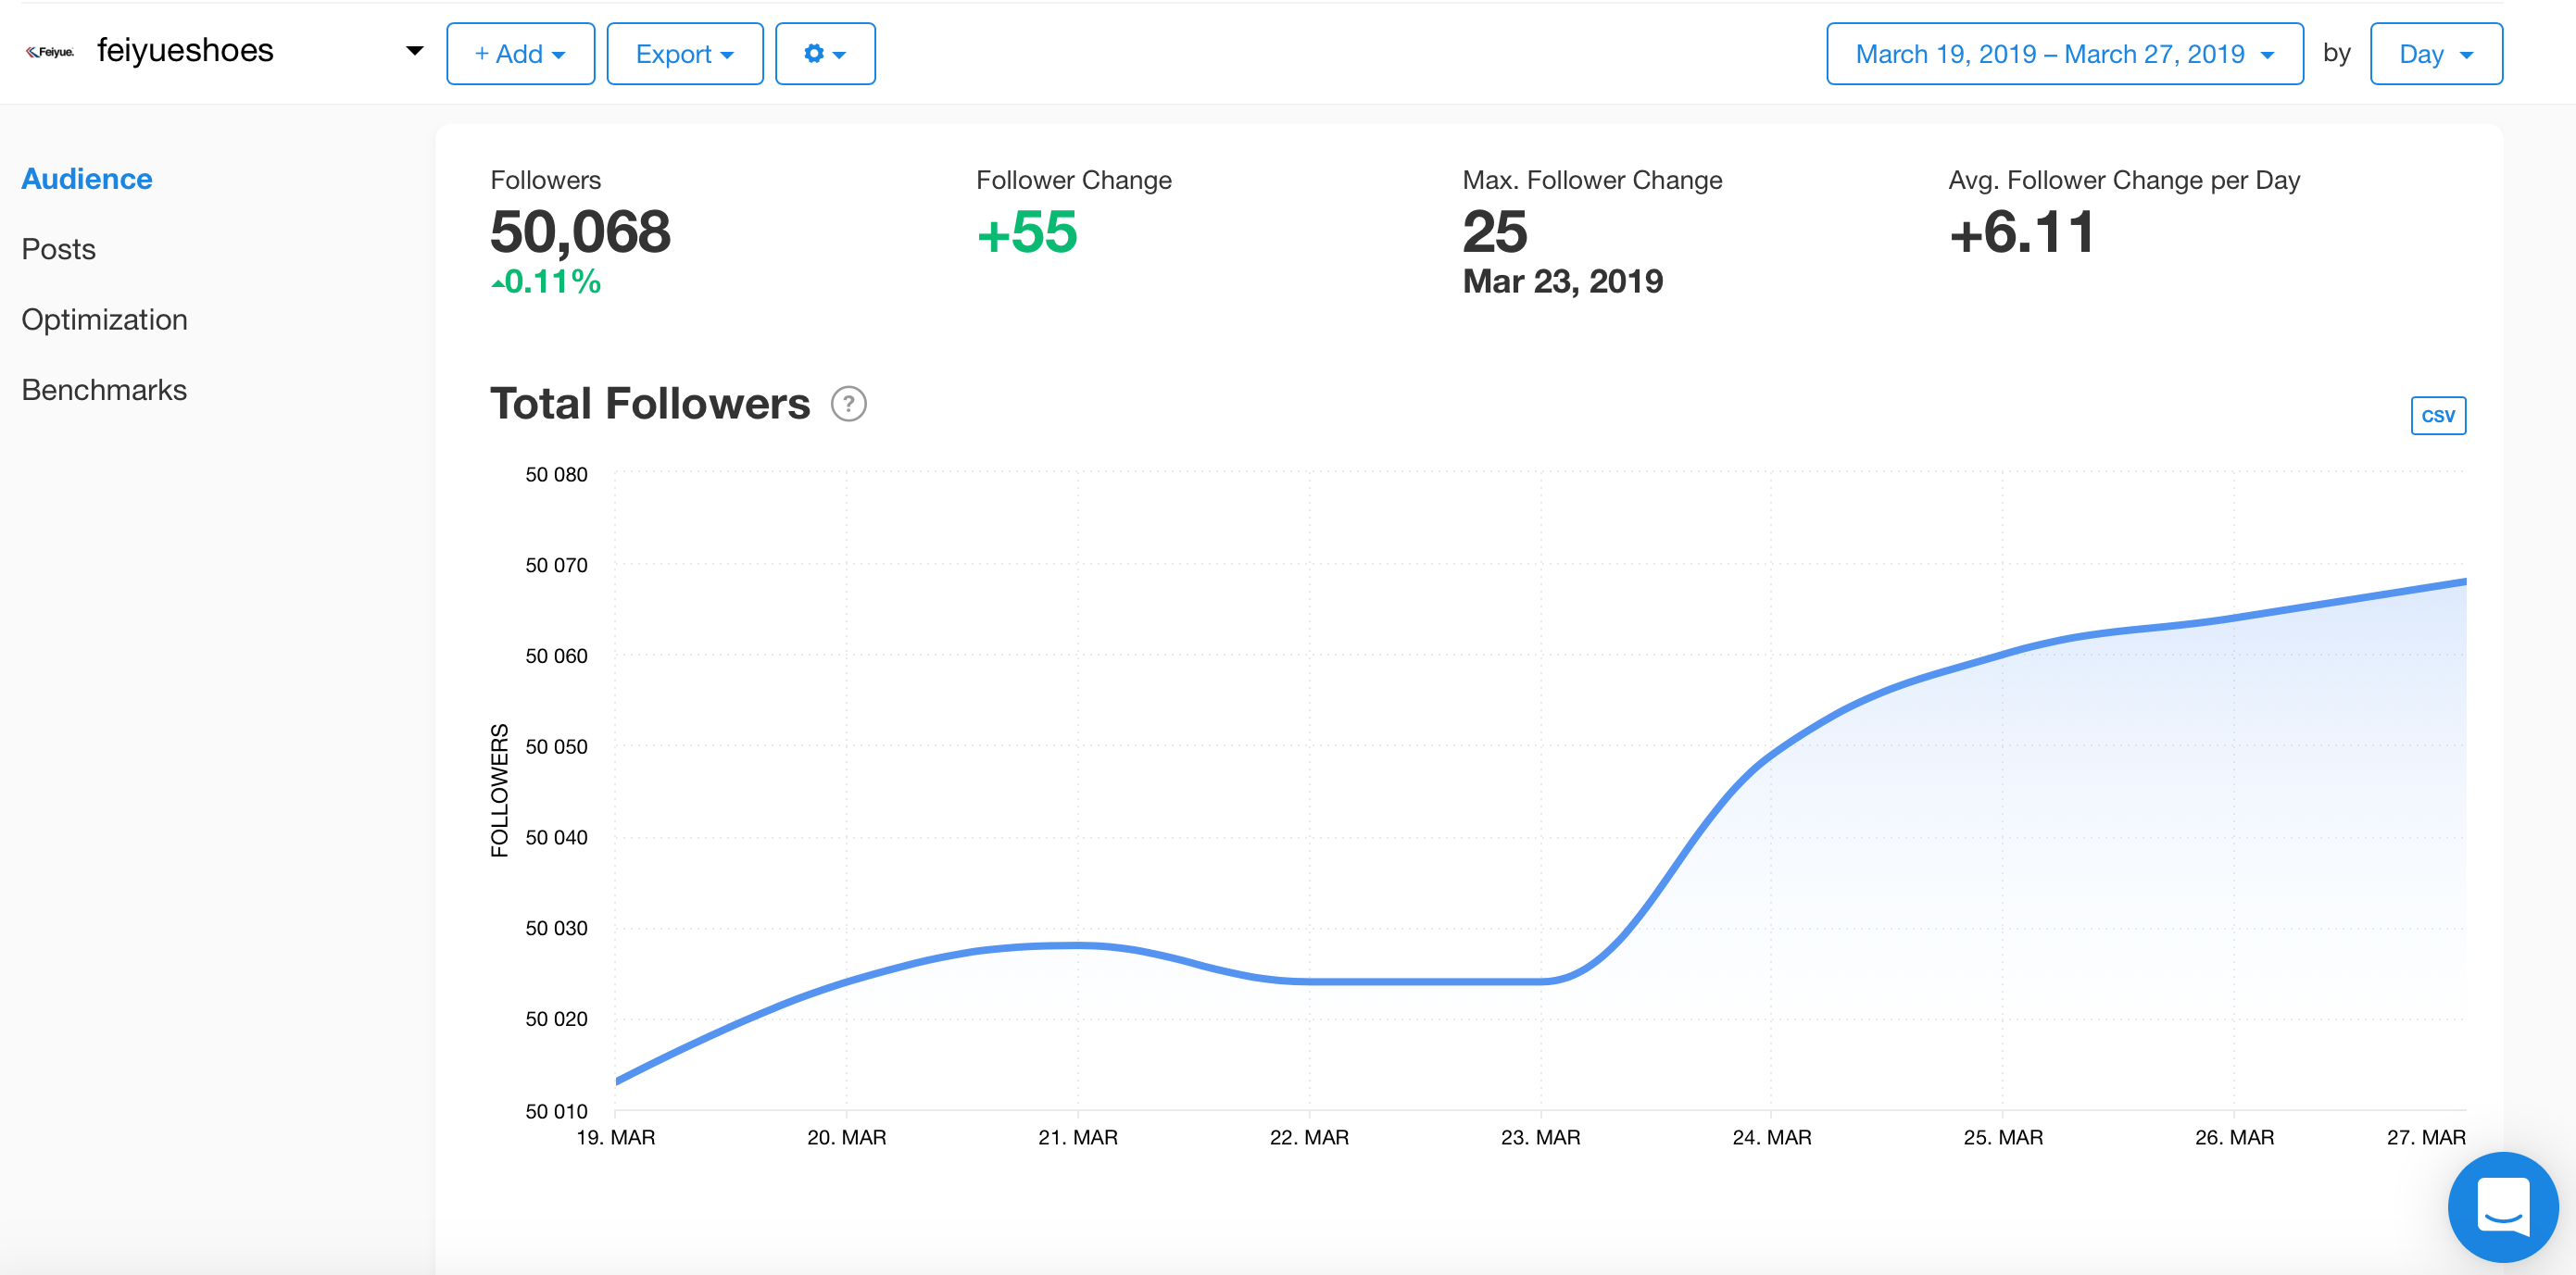 Total Followers graph from Minter.io competitors feature